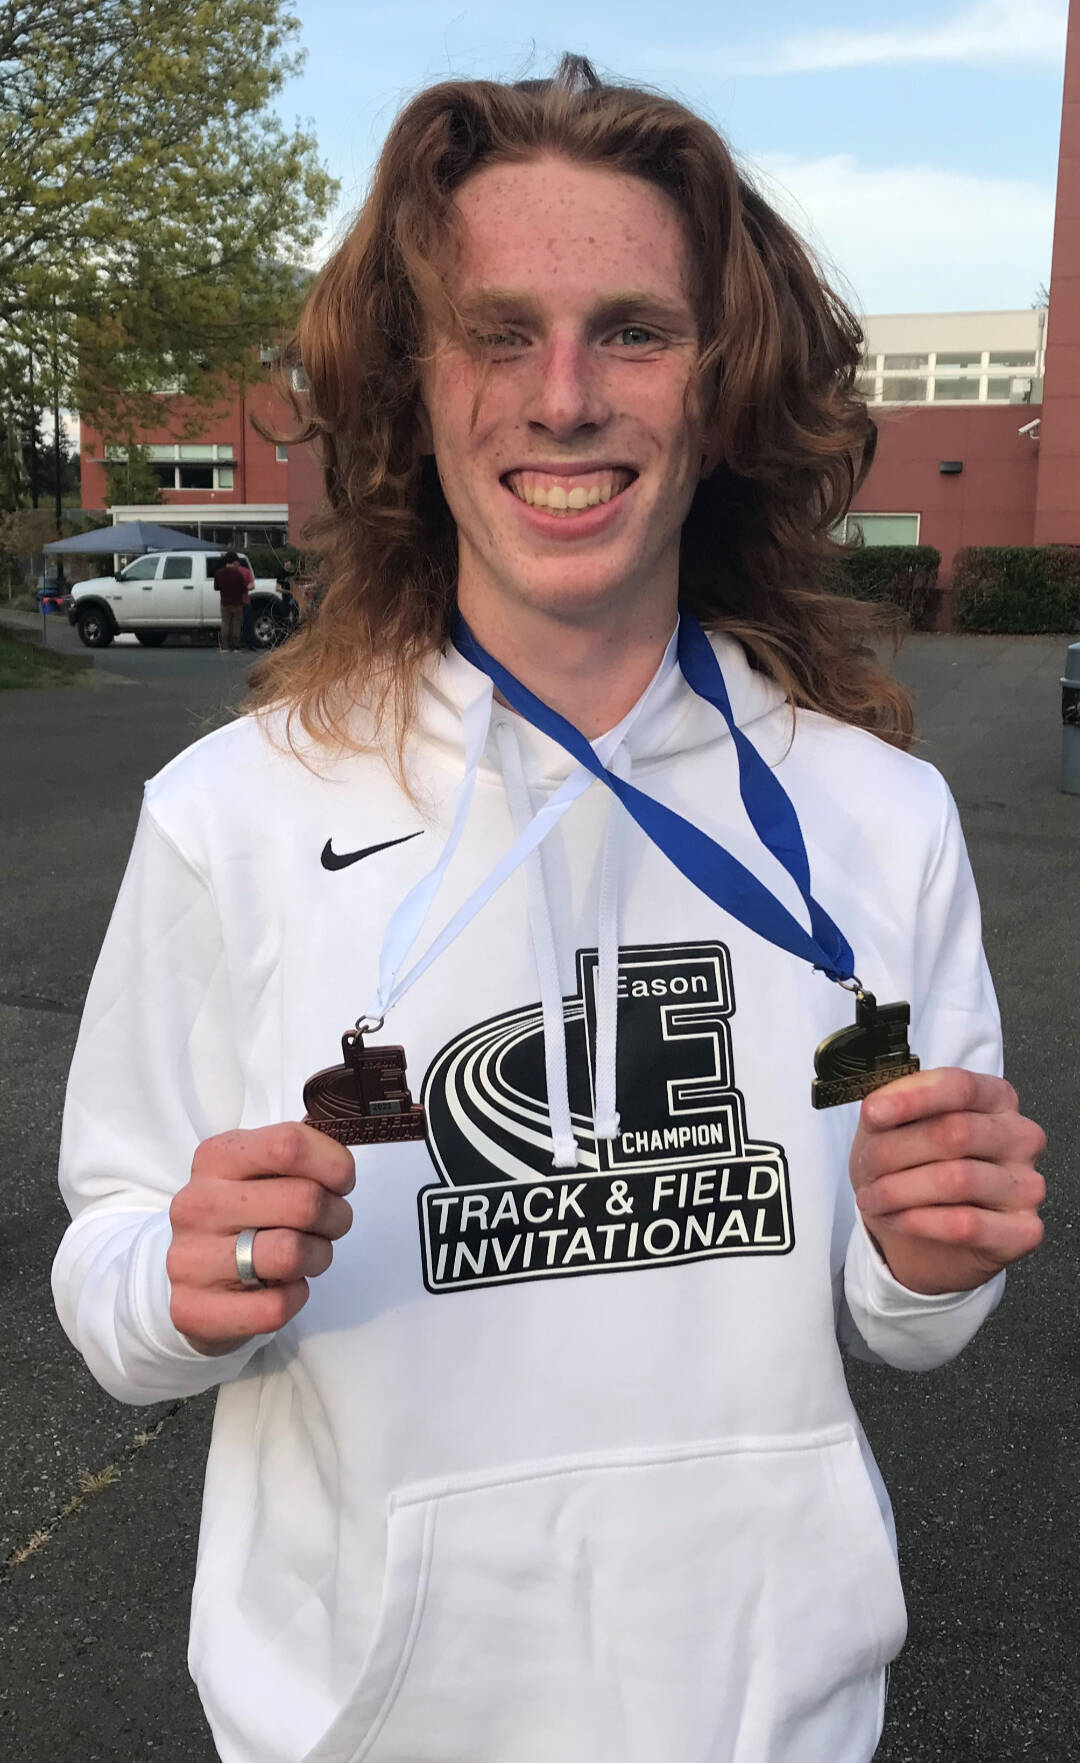 Port Angeles’ Jack Gladfelter shows off the medals he won, including a first place in the 3,200, at the Gear Up Eason Invitational held in Snohomish this weekend. Athletes from more than 50 schools competed at the meet. (Courtesy of Joe Gladfelter)